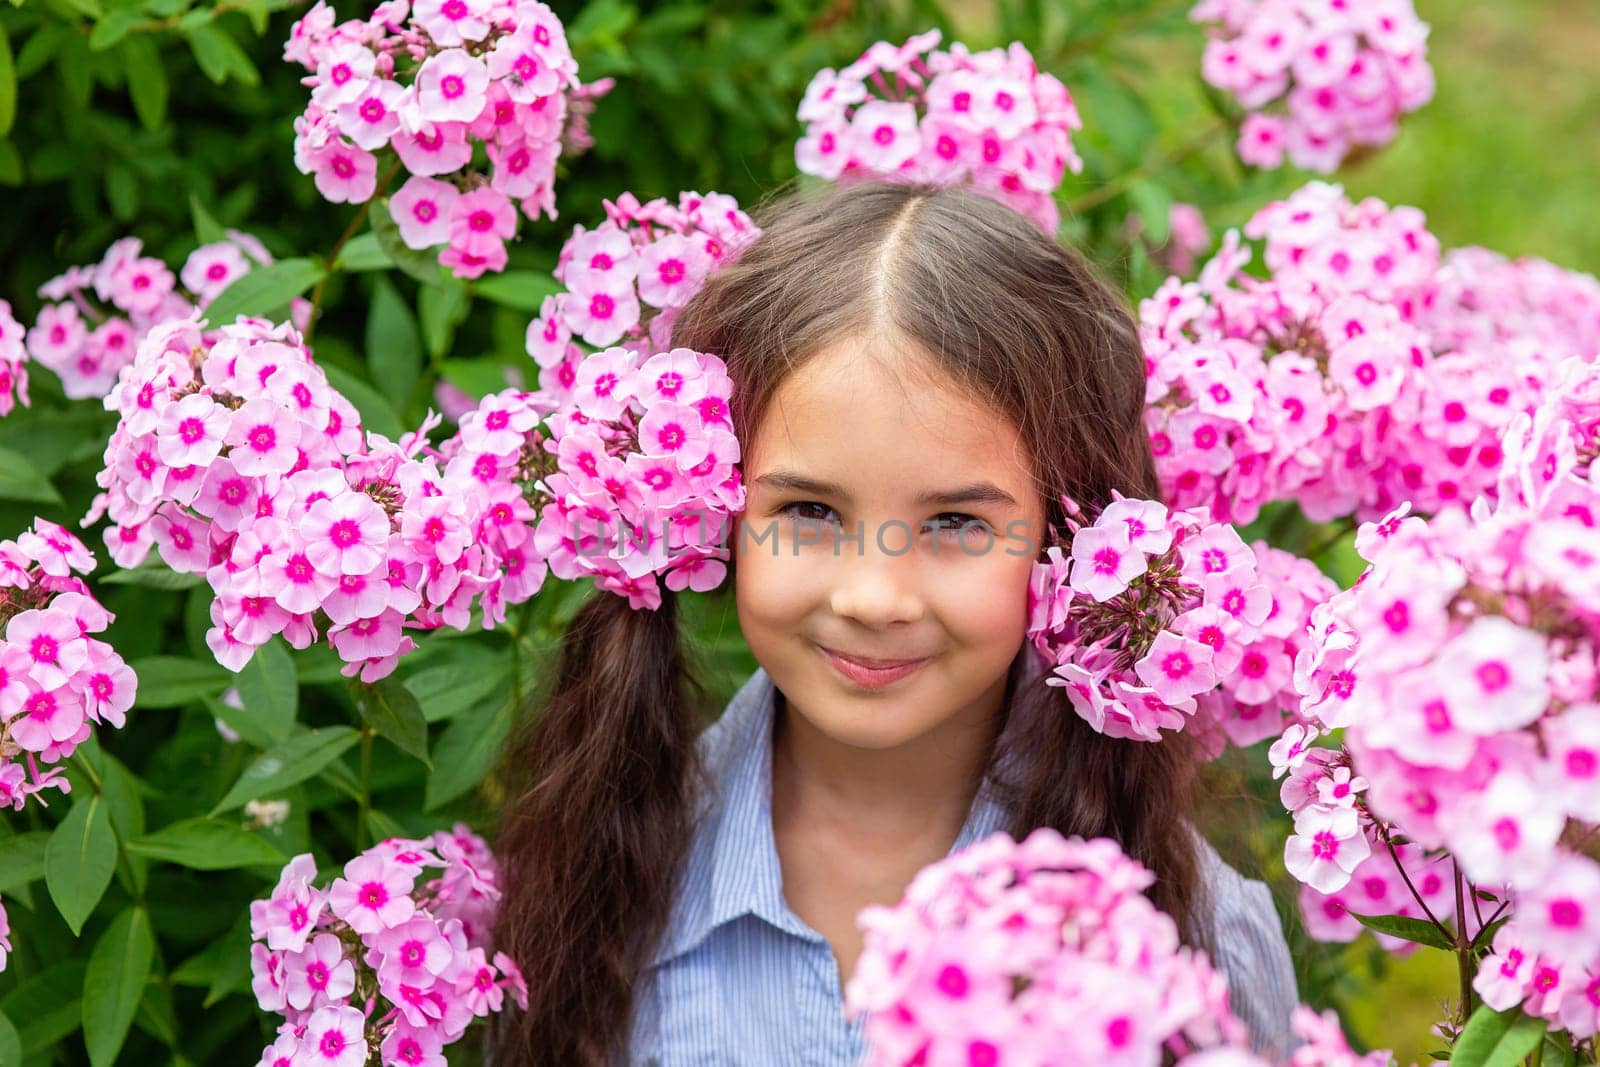 Portrait of a cute little girl in lush pink phlox flowers, summer. Close up